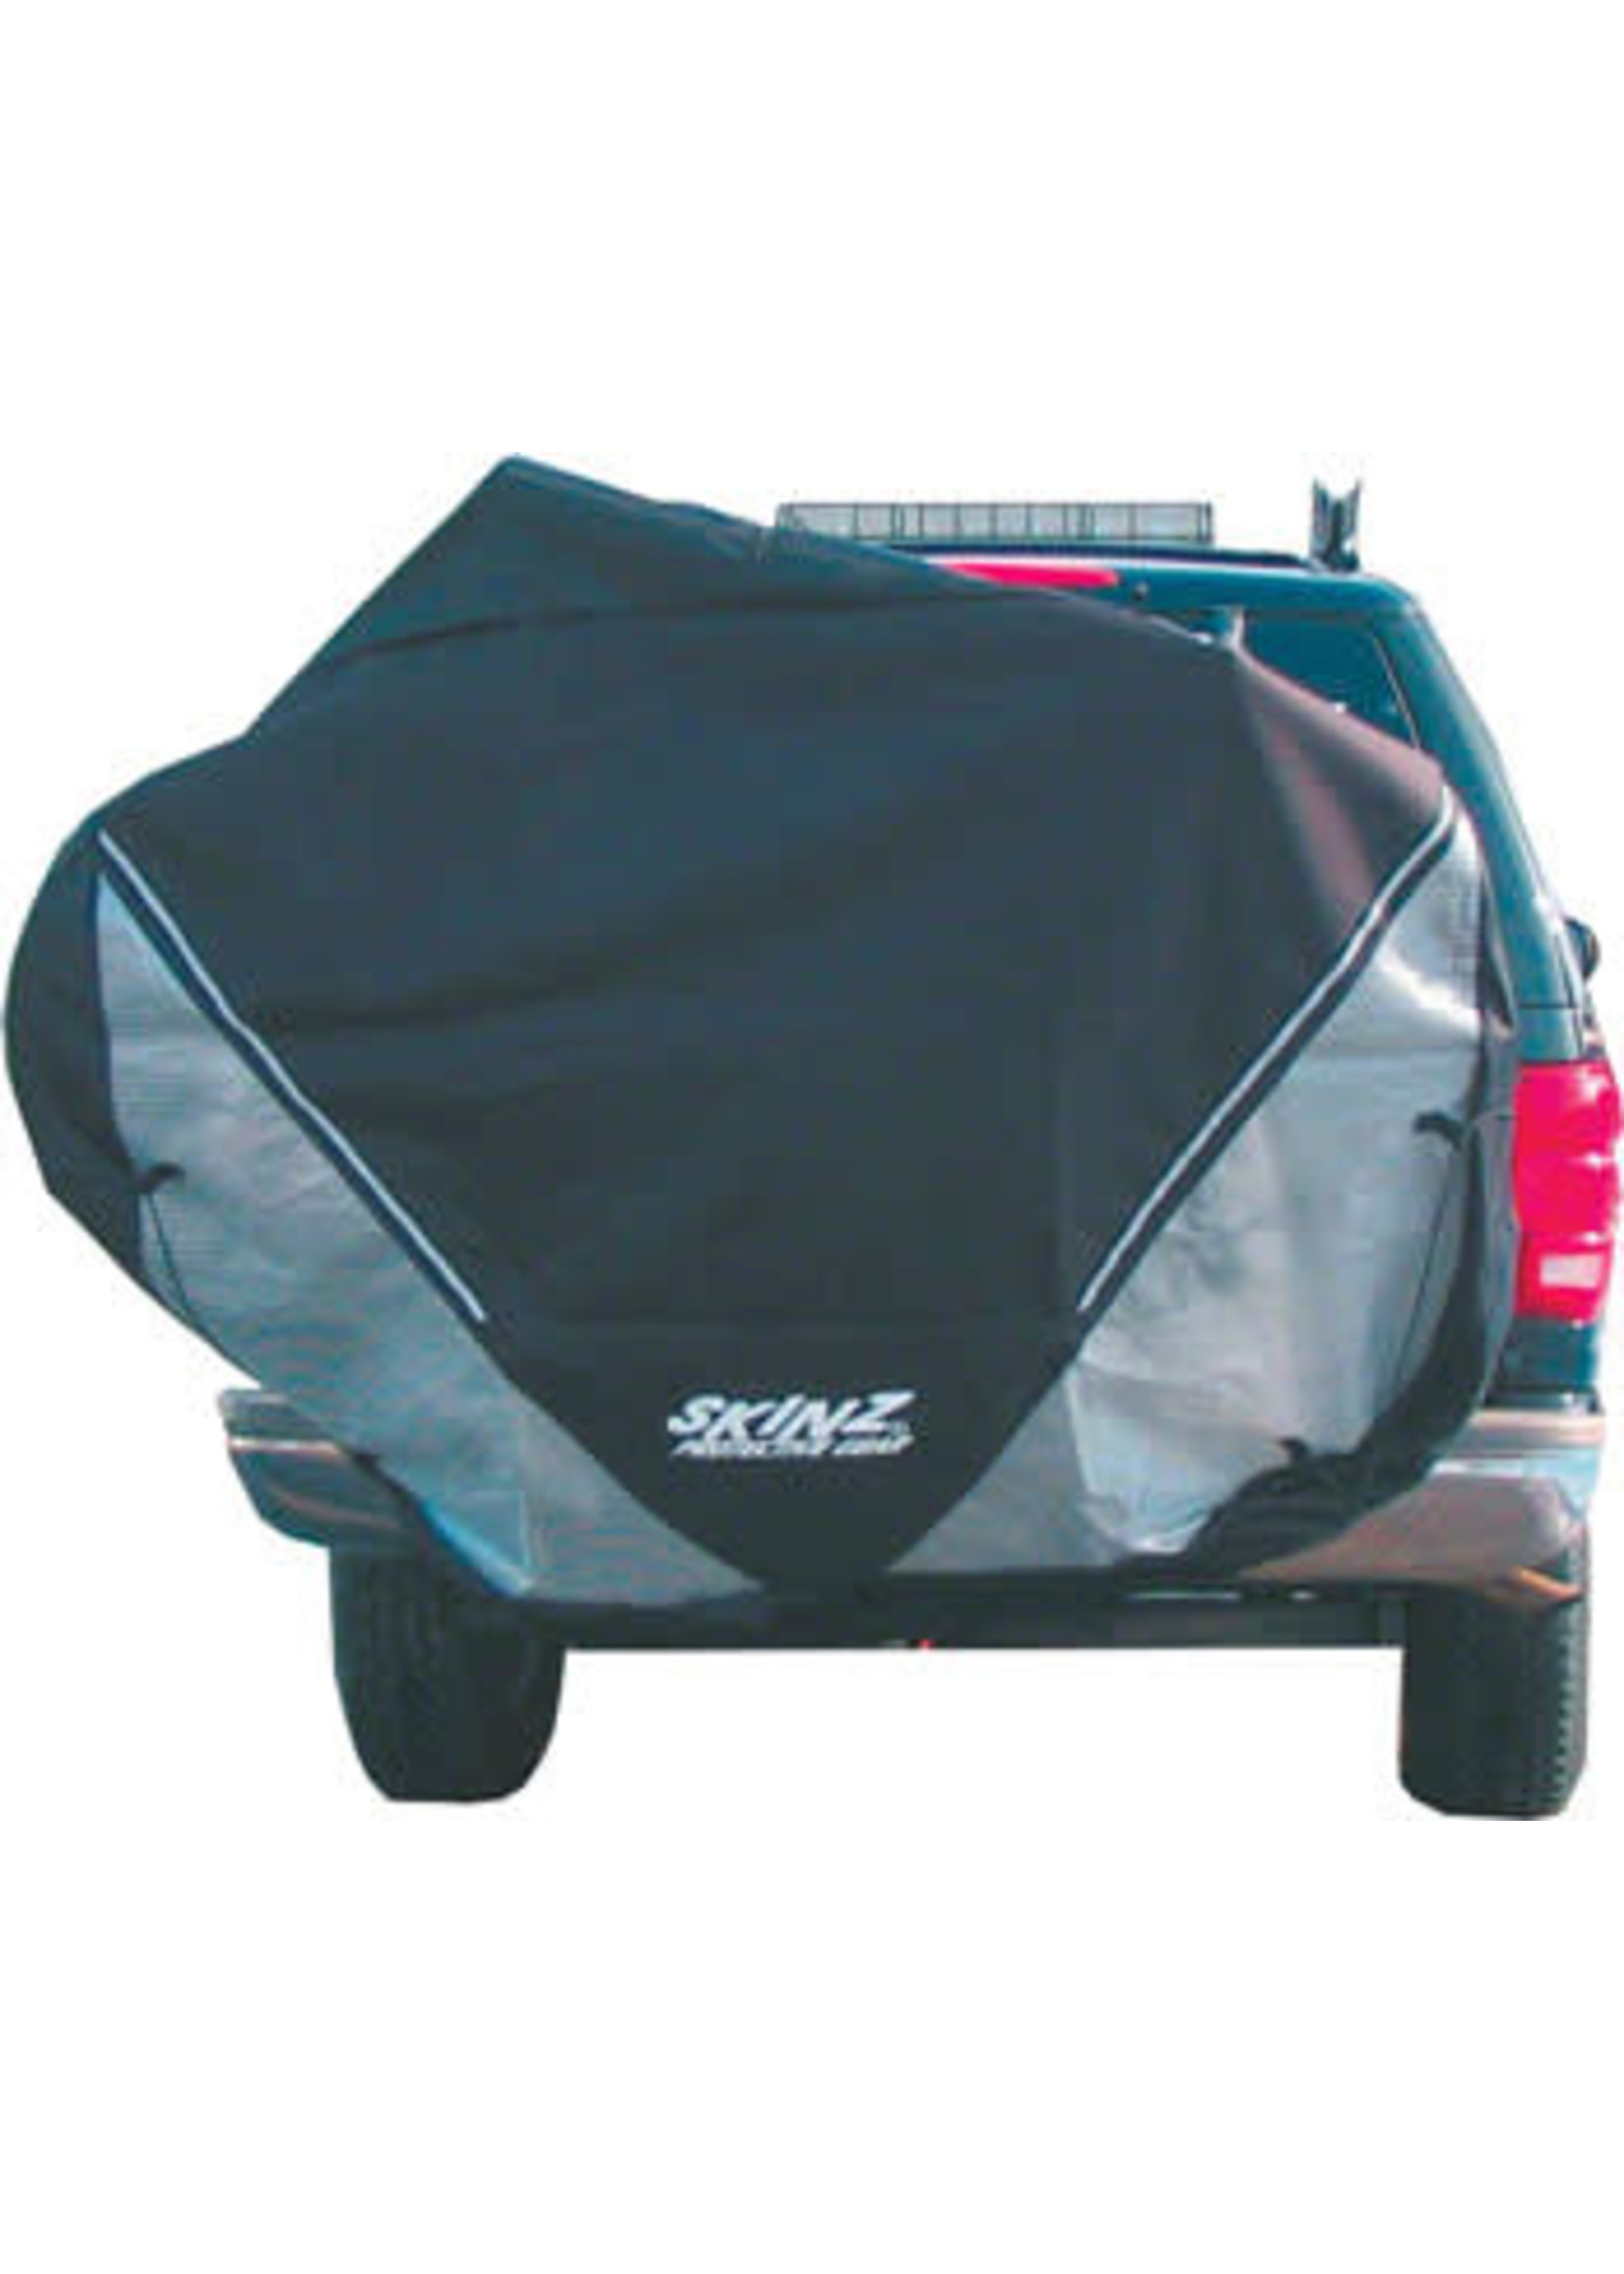 Skinz Skinz Hitch Rack Rear Transport Cover: Large